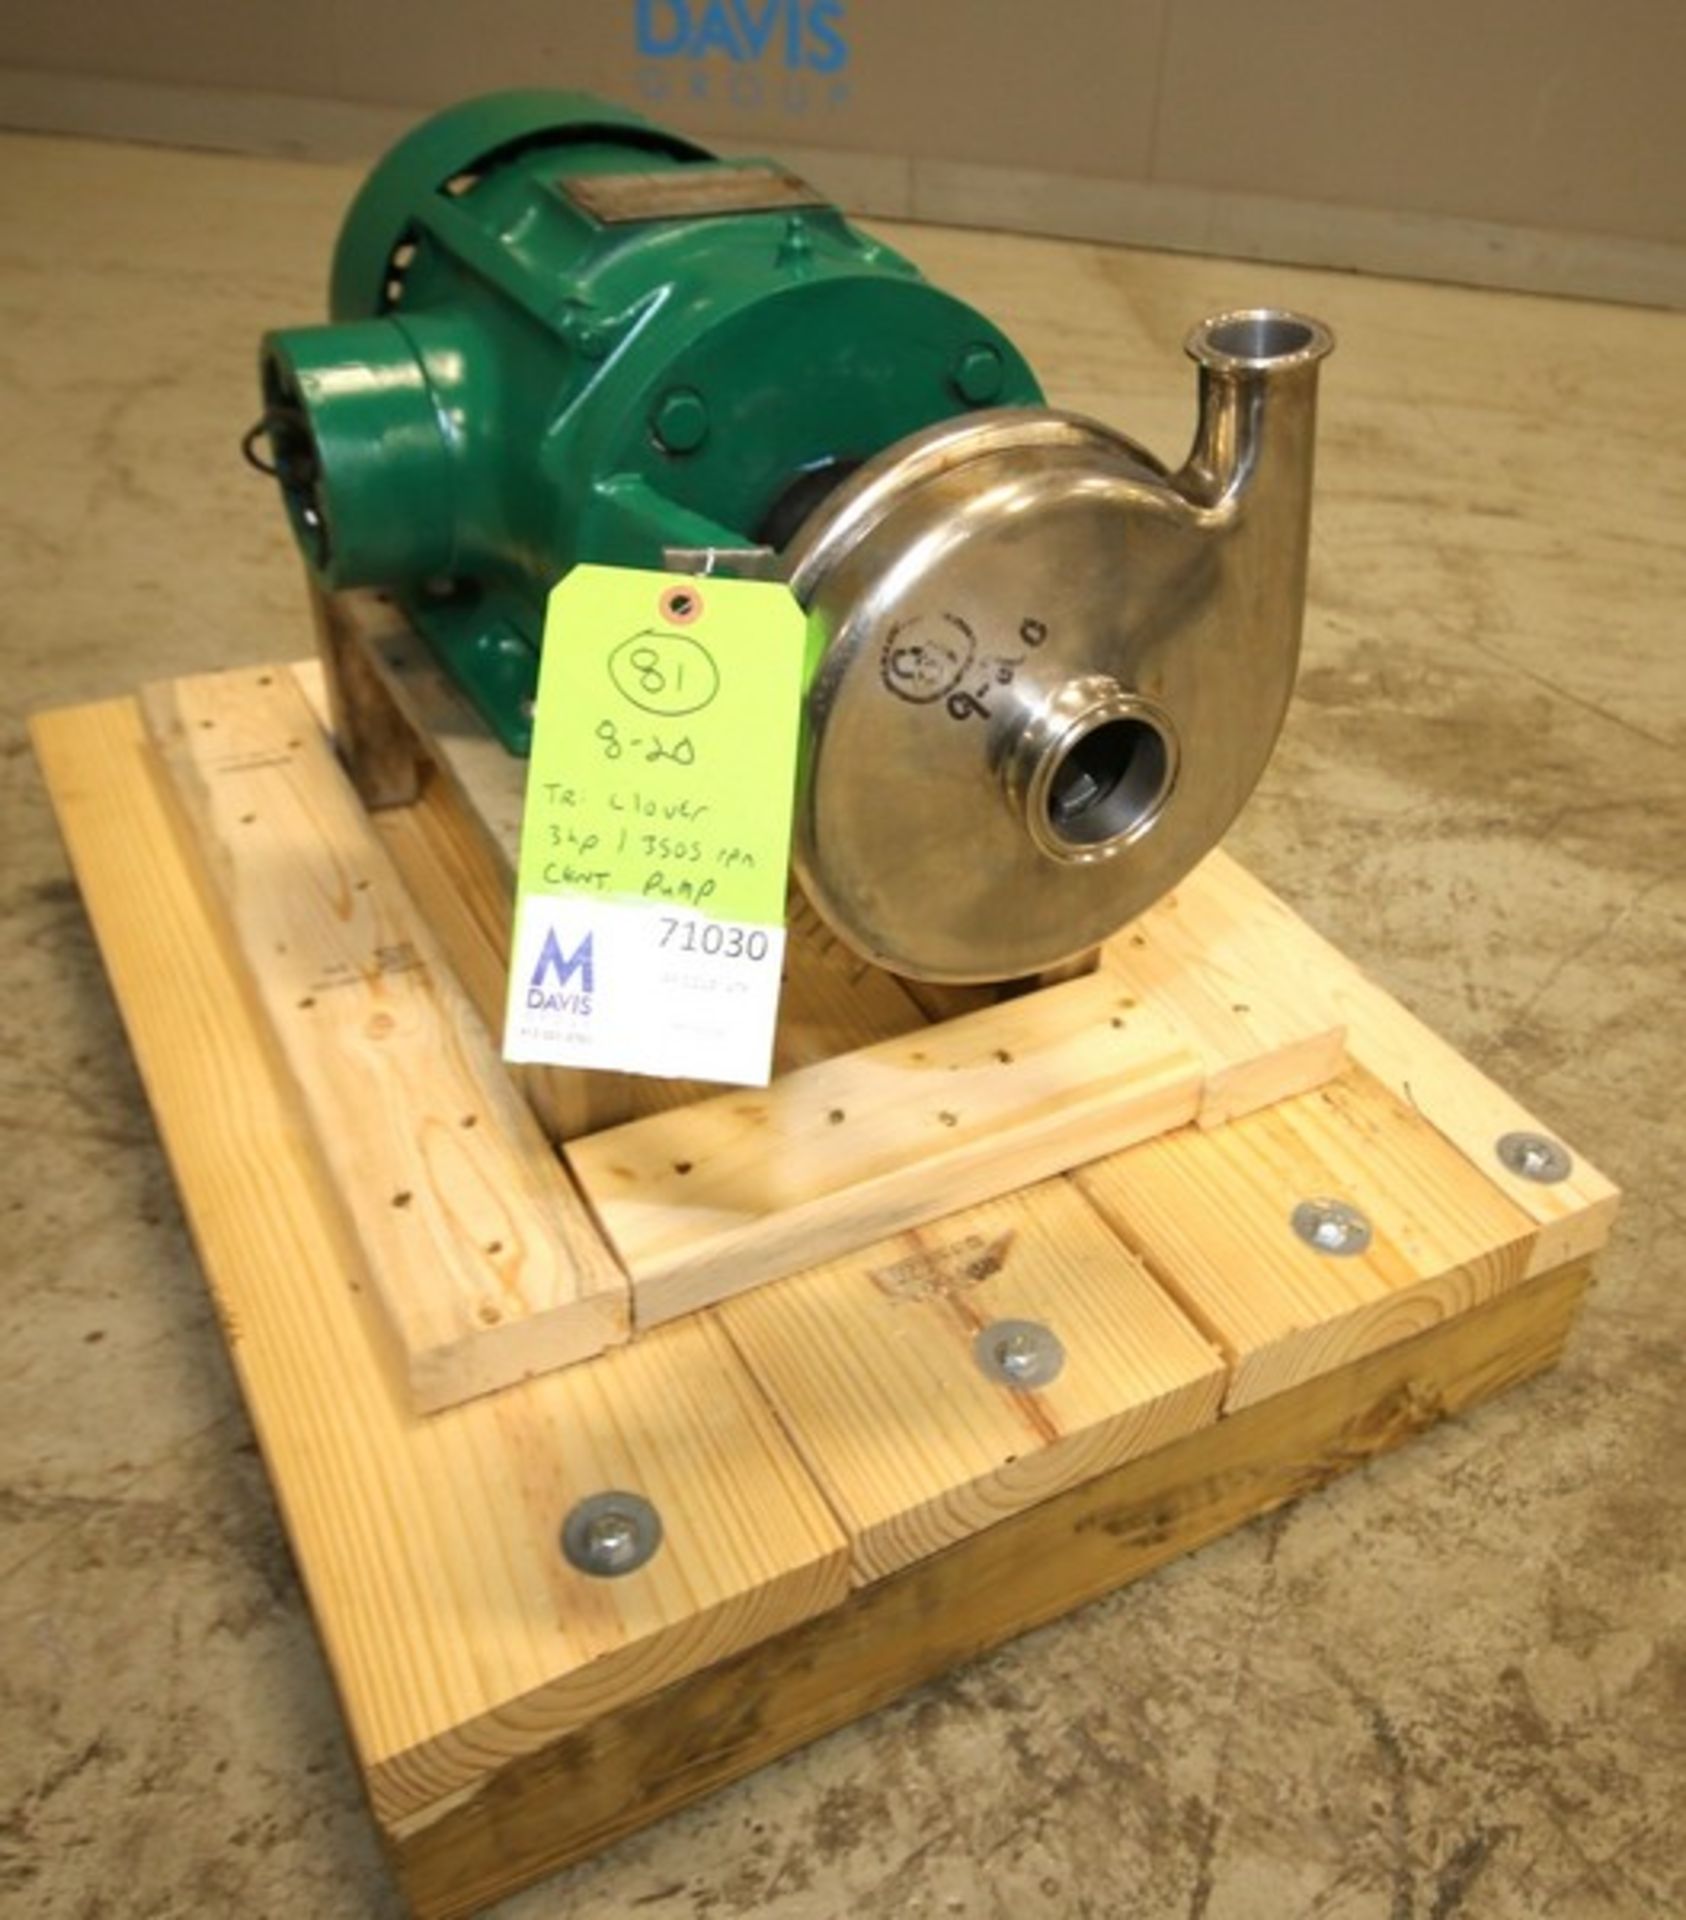 Tri-Clover 3 hp Centrifugal Pump, M/N C218MF18T-S, S/N K6632, with Aprox. 2" x 1-1/2" Clamp Type